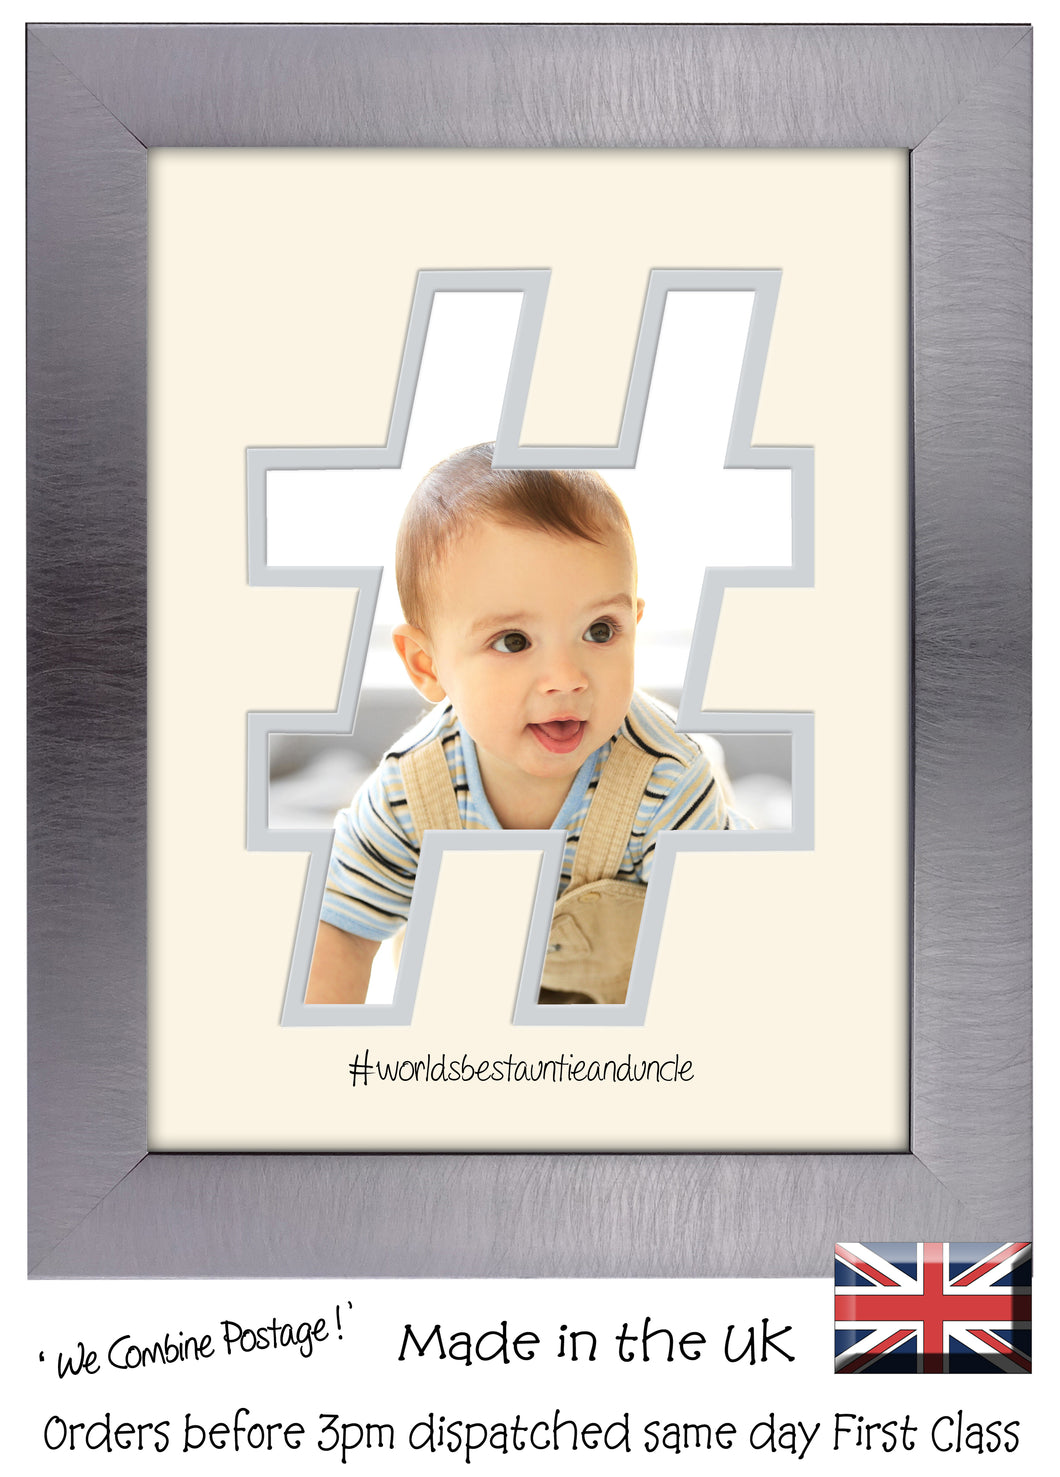 Auntie and Uncle Photo Frame World's Best Auntie and Uncle Hashtag photo frame 6